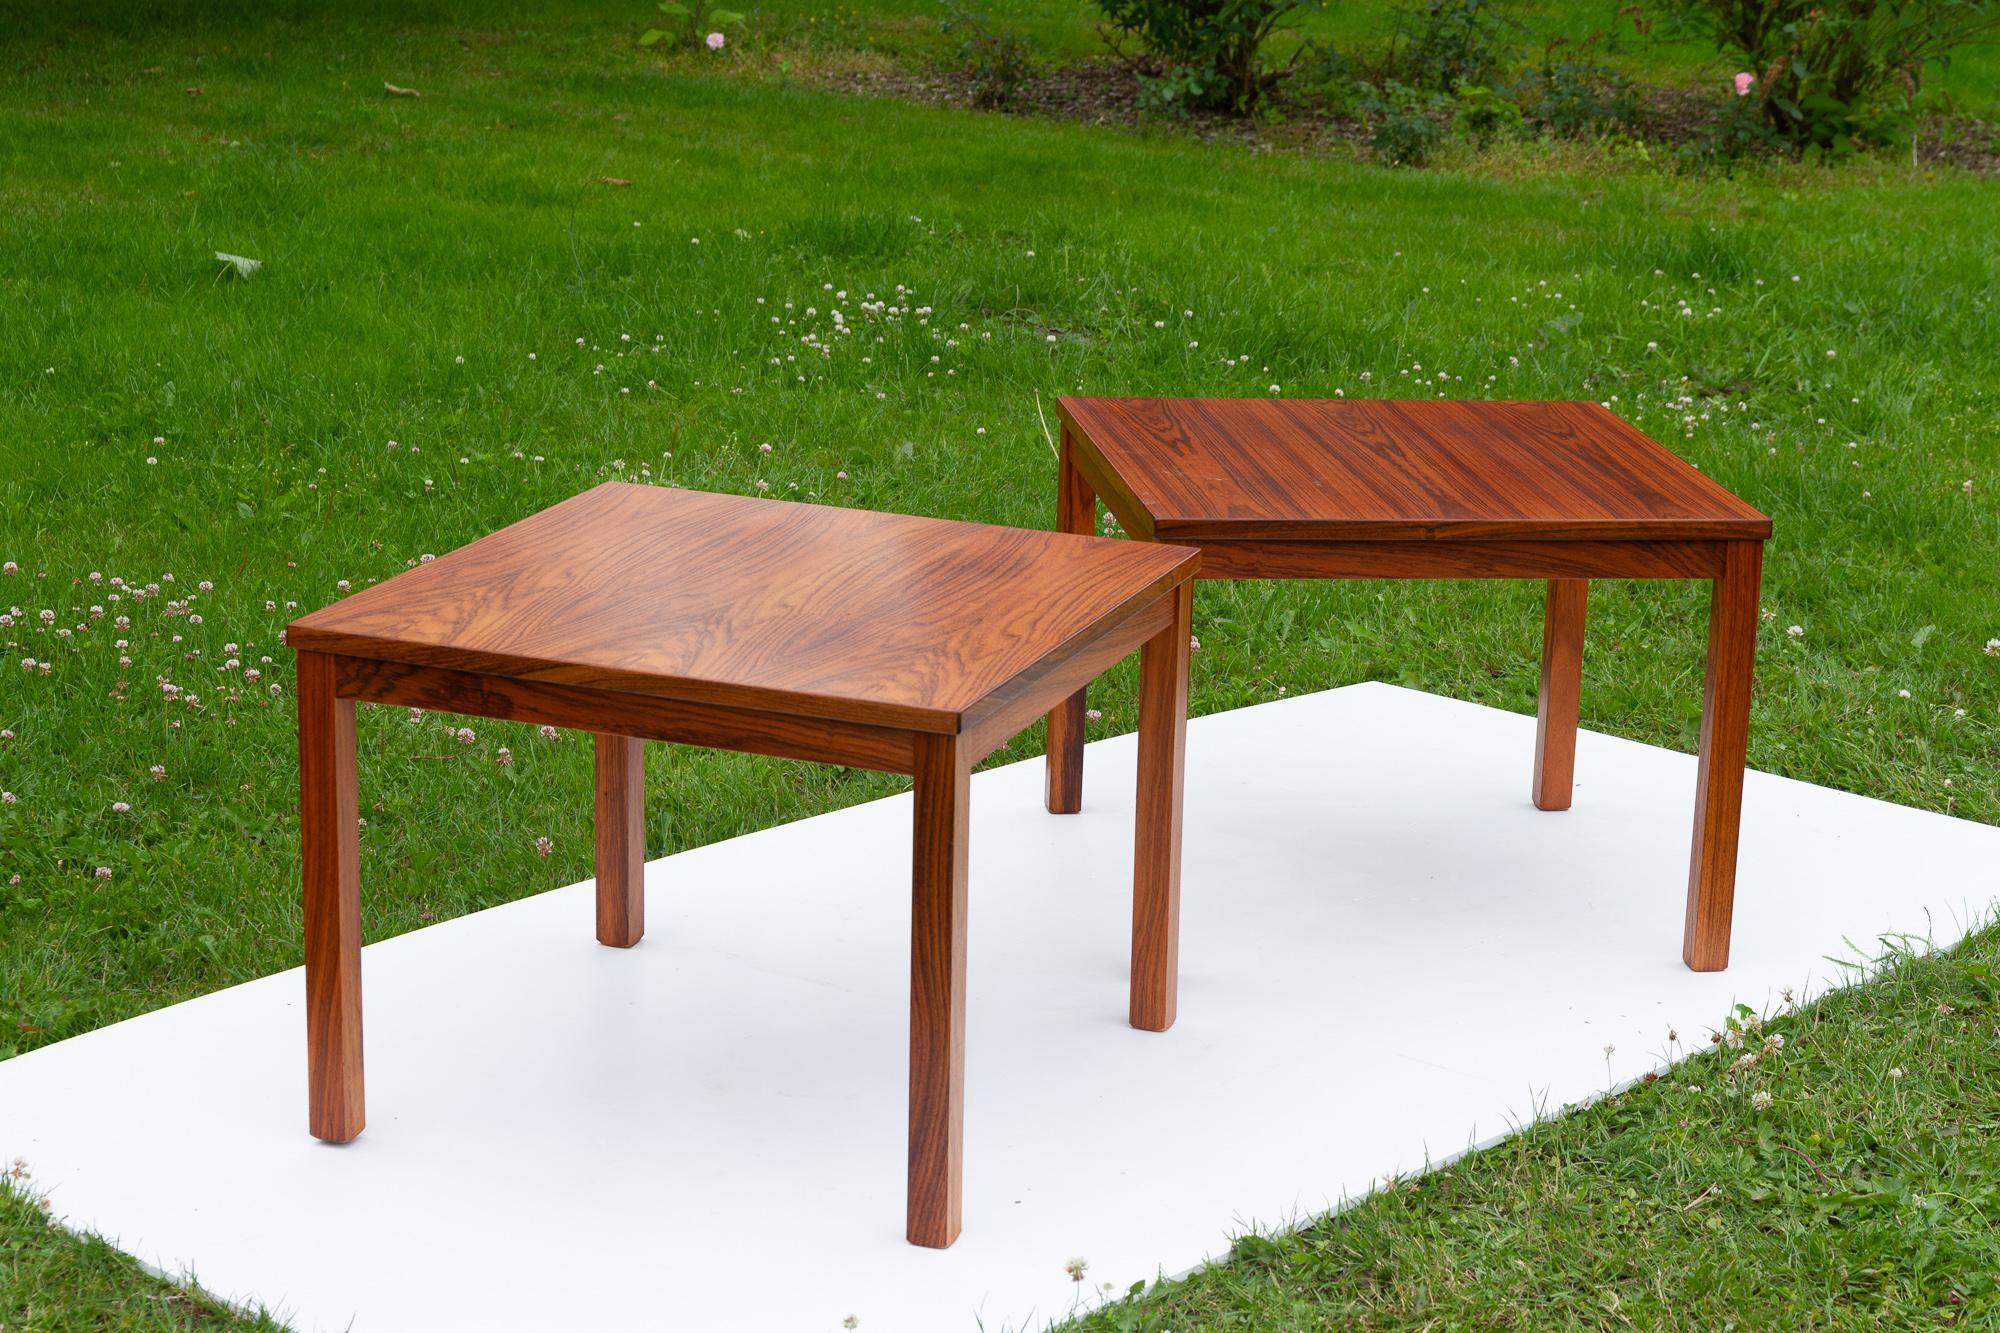 Danish Modern rosewood side tables, 1960s, set of 2. 
Pair of two matching tables in beautiful rosewood veneer. Square top with rectangular legs. Made in Denmark. 
Suitable as end tables, bedside tables or coffee tables.

Legs can be removed for